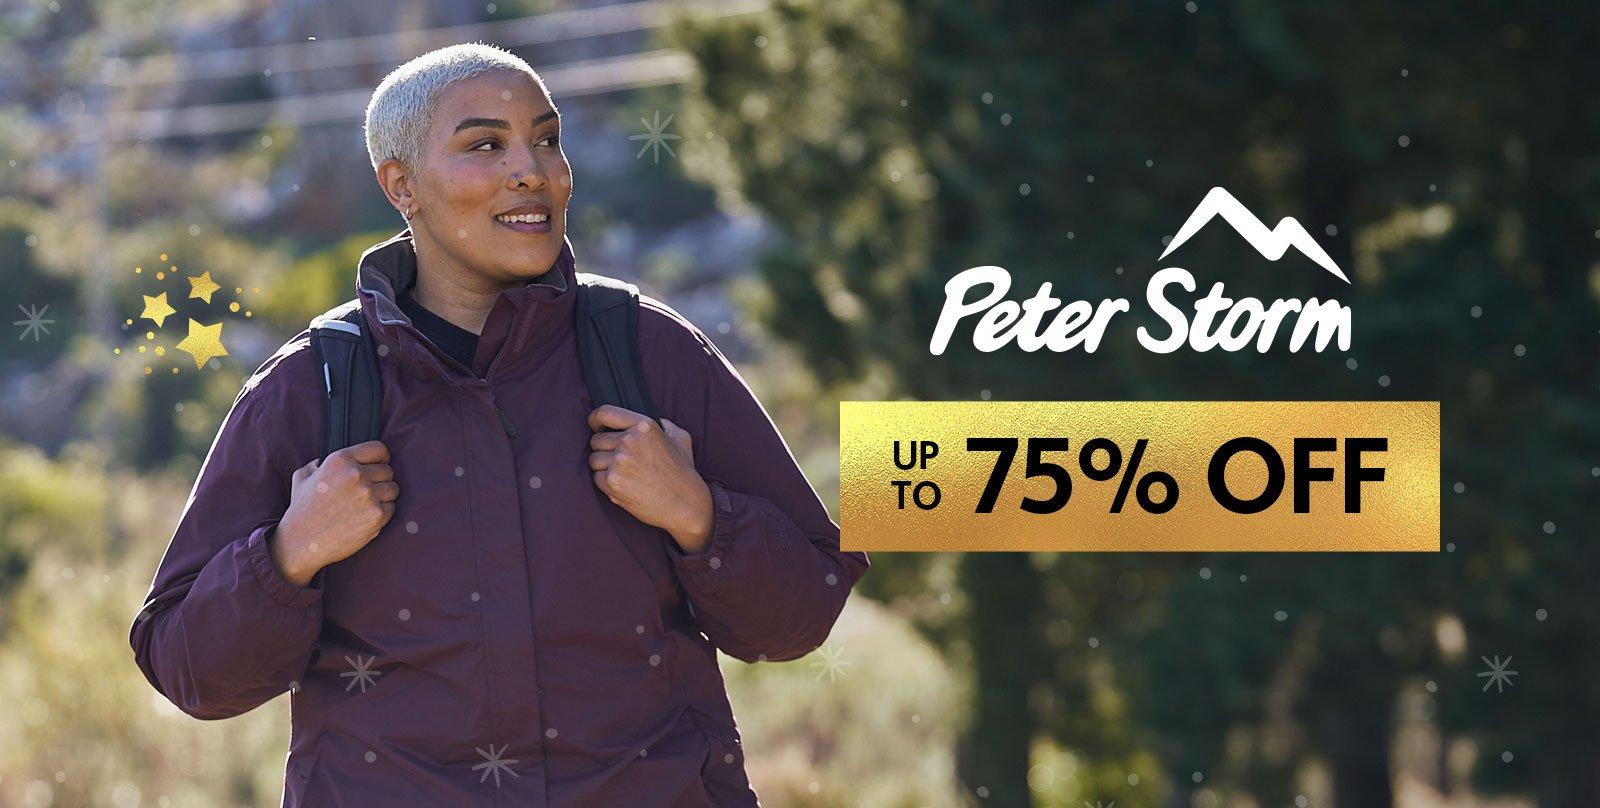 Up to 75% OFF Peter Storm